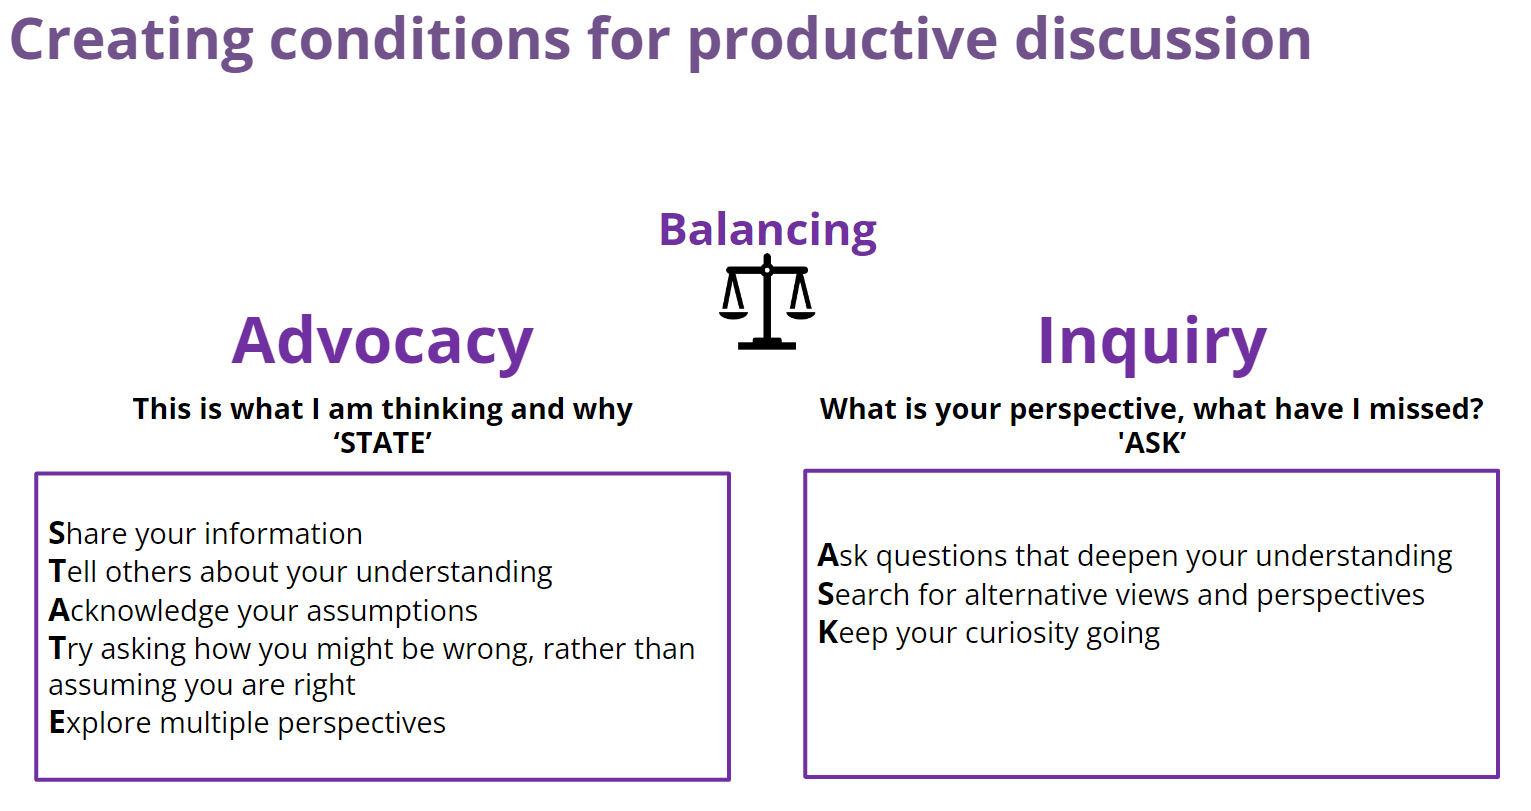 an image showing the conditions for productive discussion - showing the need to balance advocacy and inquiry

Text on image is as follows:
Creating conditions for productive discussion:   Balancing Advocacy and Inquiry

Advocacy - this is what I am thinking and why  - S T A T E 
Share your information, Tell others about your understanding, Acknowledge your assumptions, Try asking how you might be wrong, rather than assuming you are right, Explore multiple perspectives.

Inquiry - what is your perspective, what have I missed? - ASK
Ask questions that deepen your understanding, Search for alternative views and perspectives, Keep your curiosity going